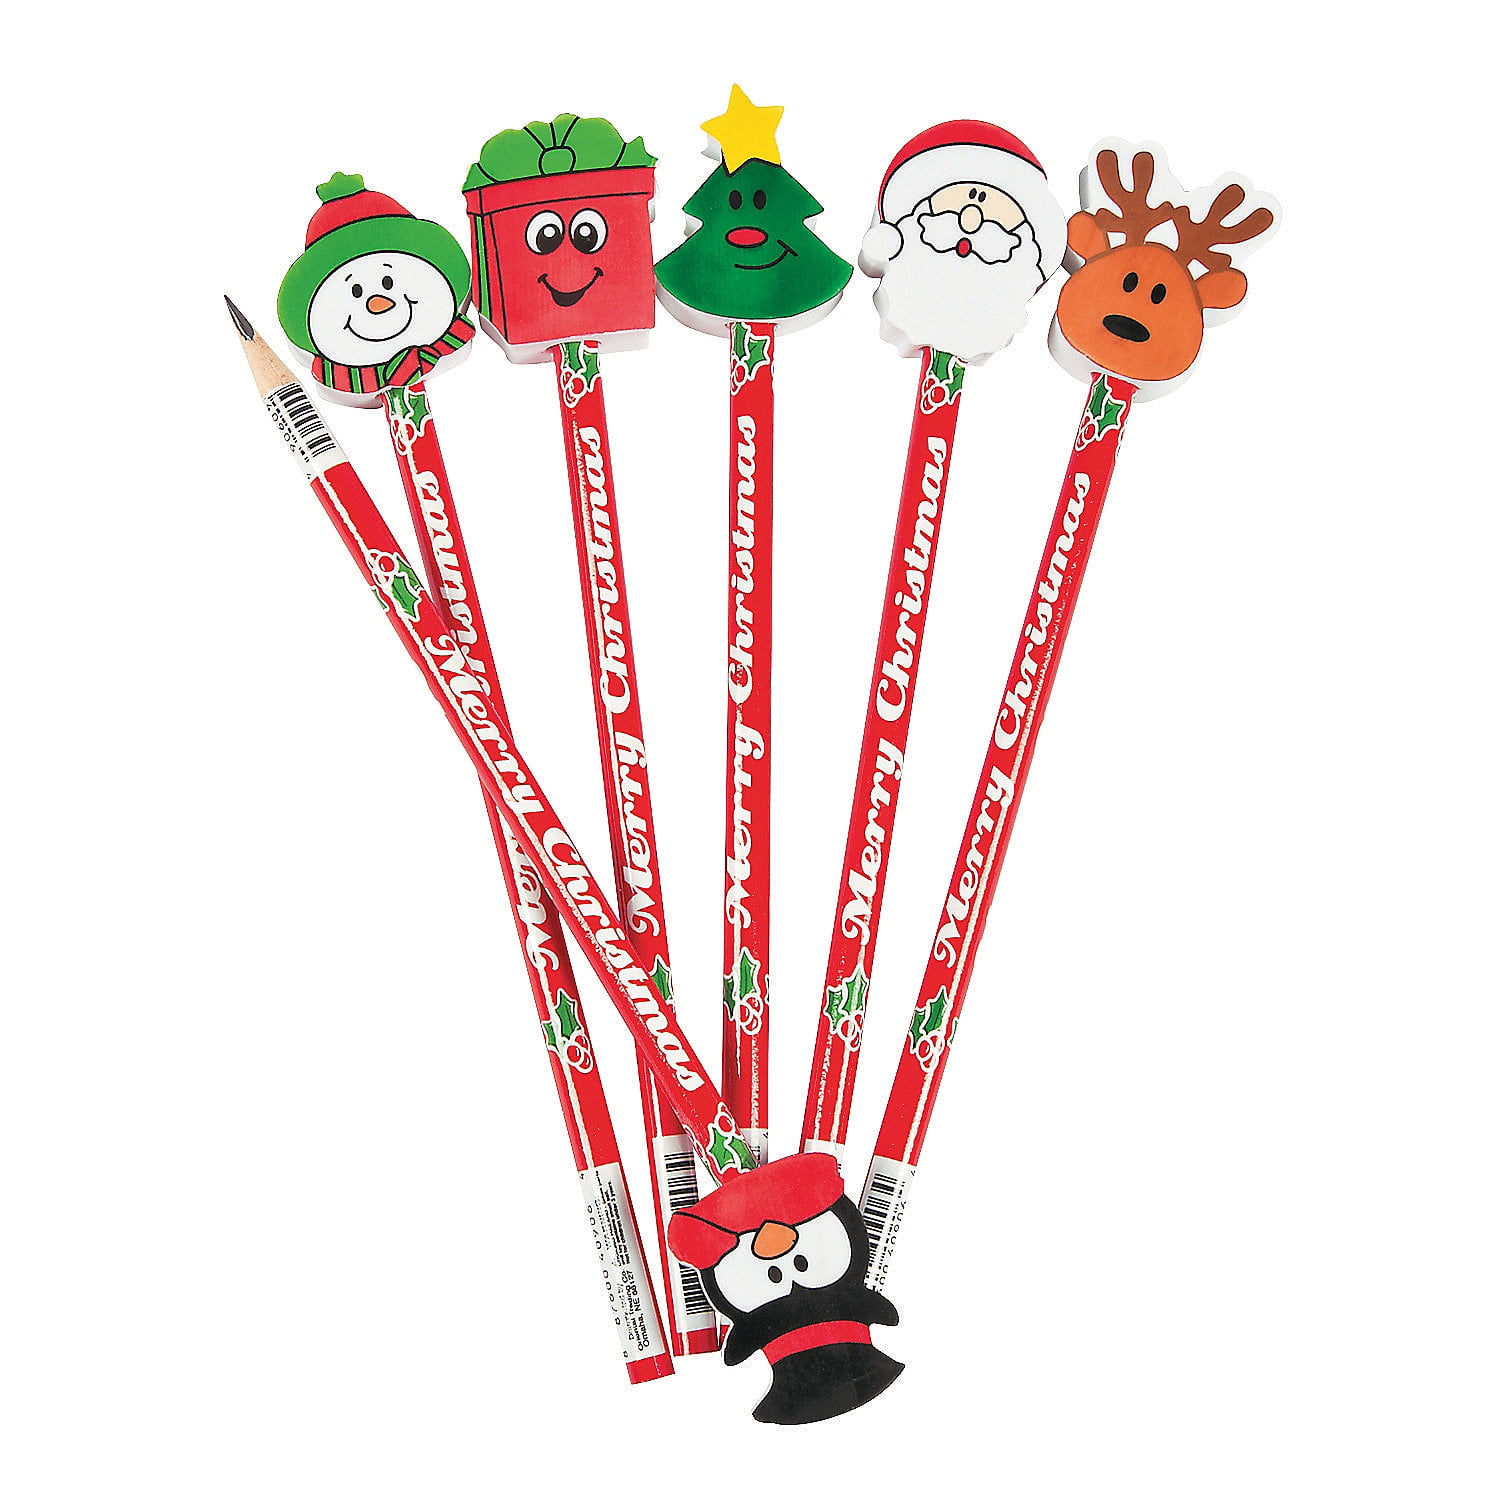 TOYMYTOY Christmas Pencil With Eraser Colorful Assorted Colorful Kids Pencils 12 Packs 